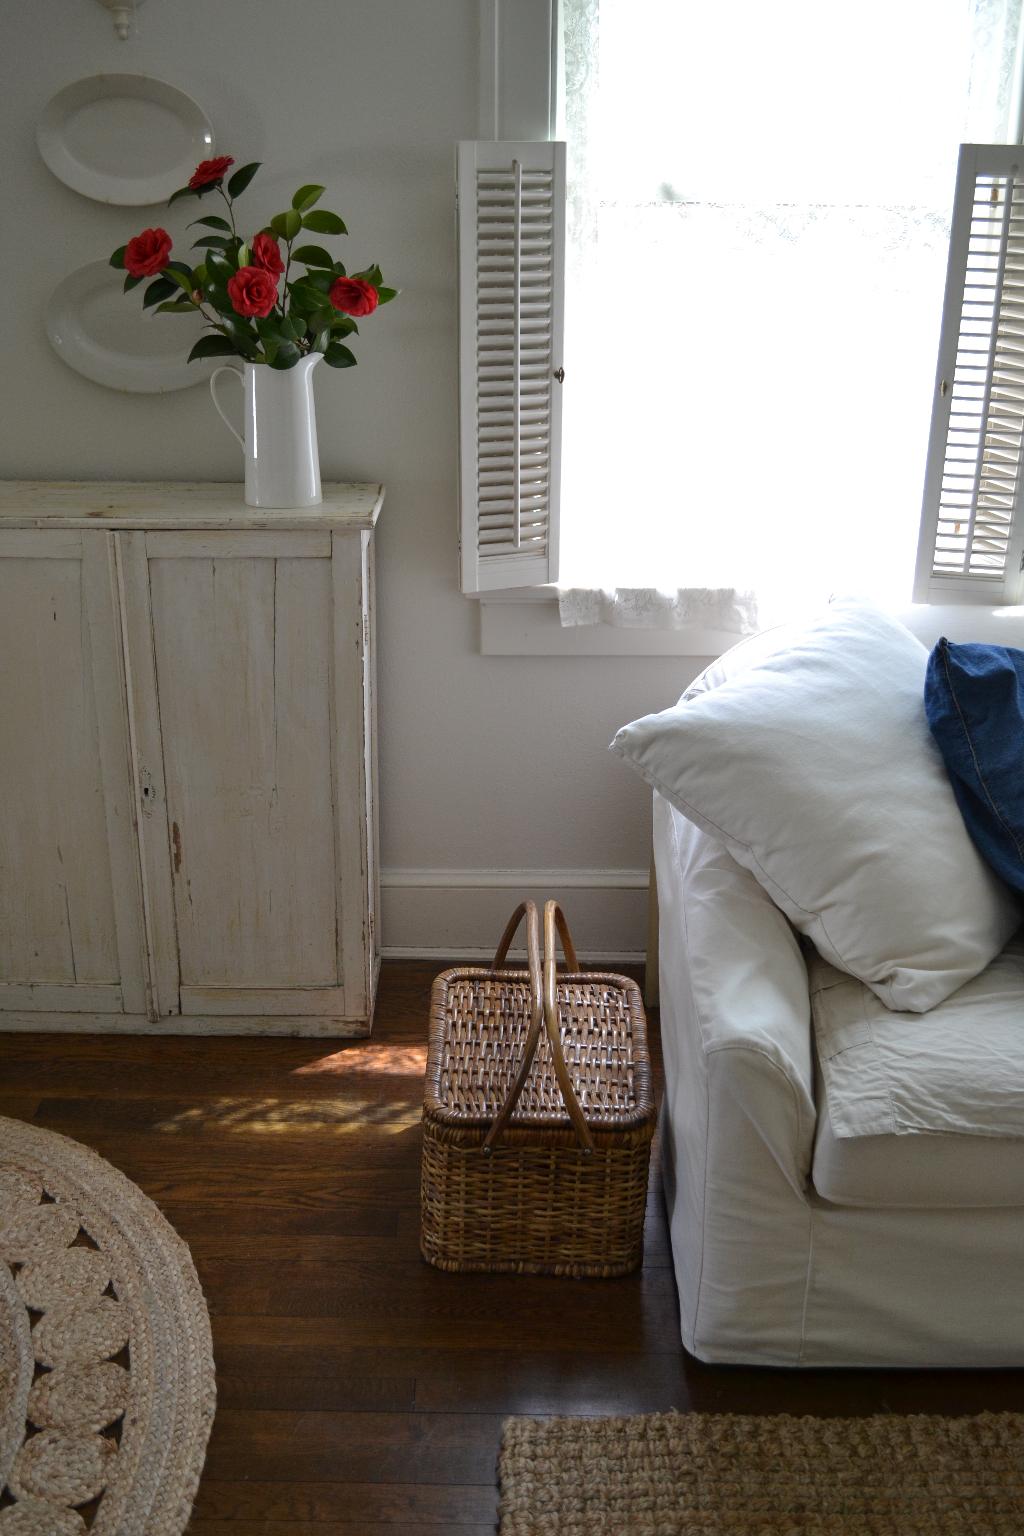 Cottage Fix blog - warm whites, red camellias, and a picnic basket